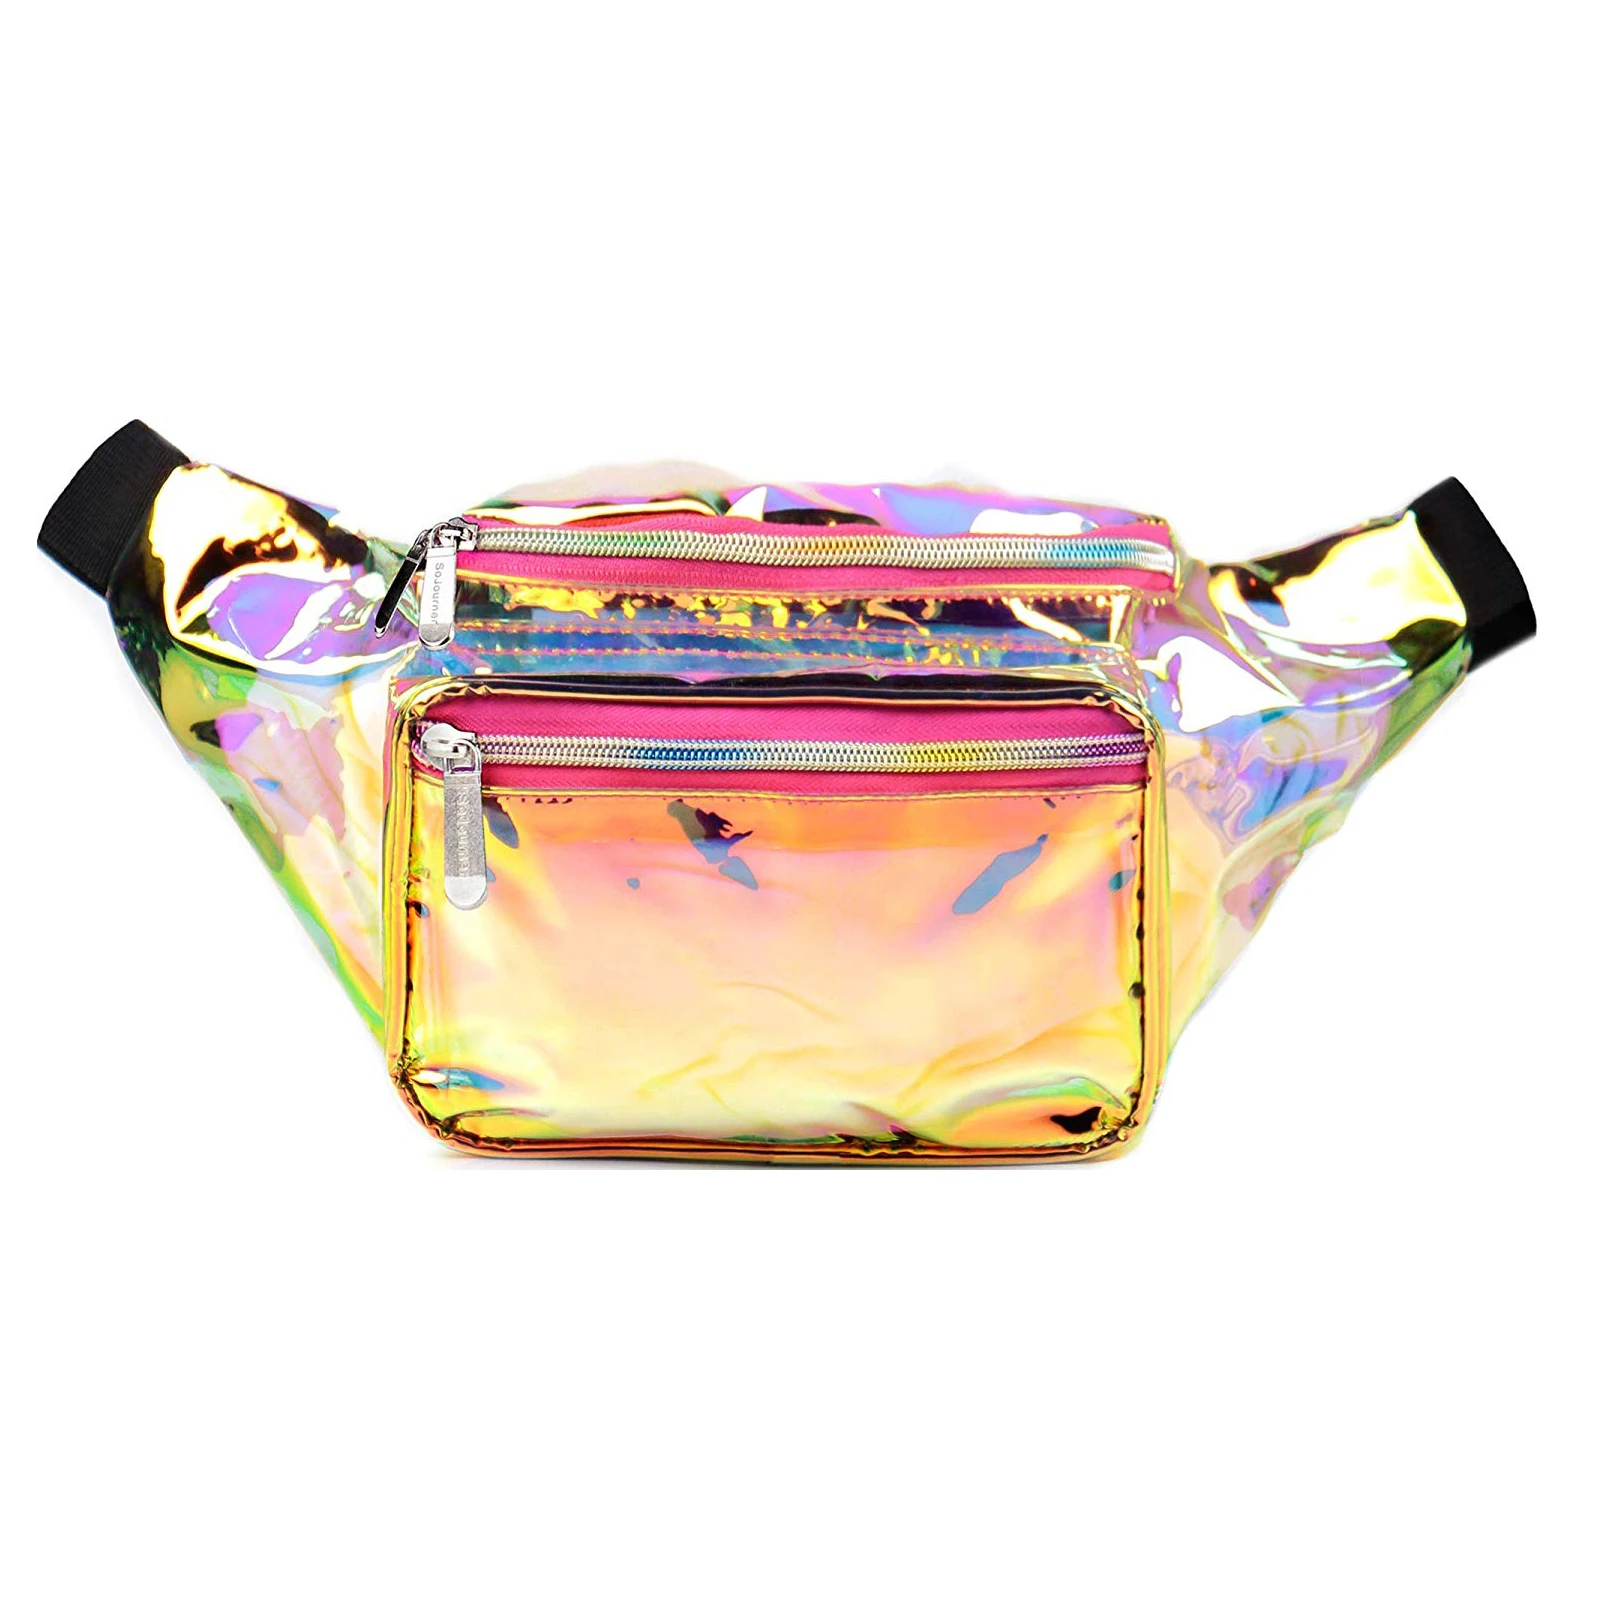 OYYF Holographic Fanny Packs Belt Bag for Women Men Fashion Waterproof Waist Pack with 3 Pouches Adjustable Strap for Travel Festival Hiking Rave Shopping 